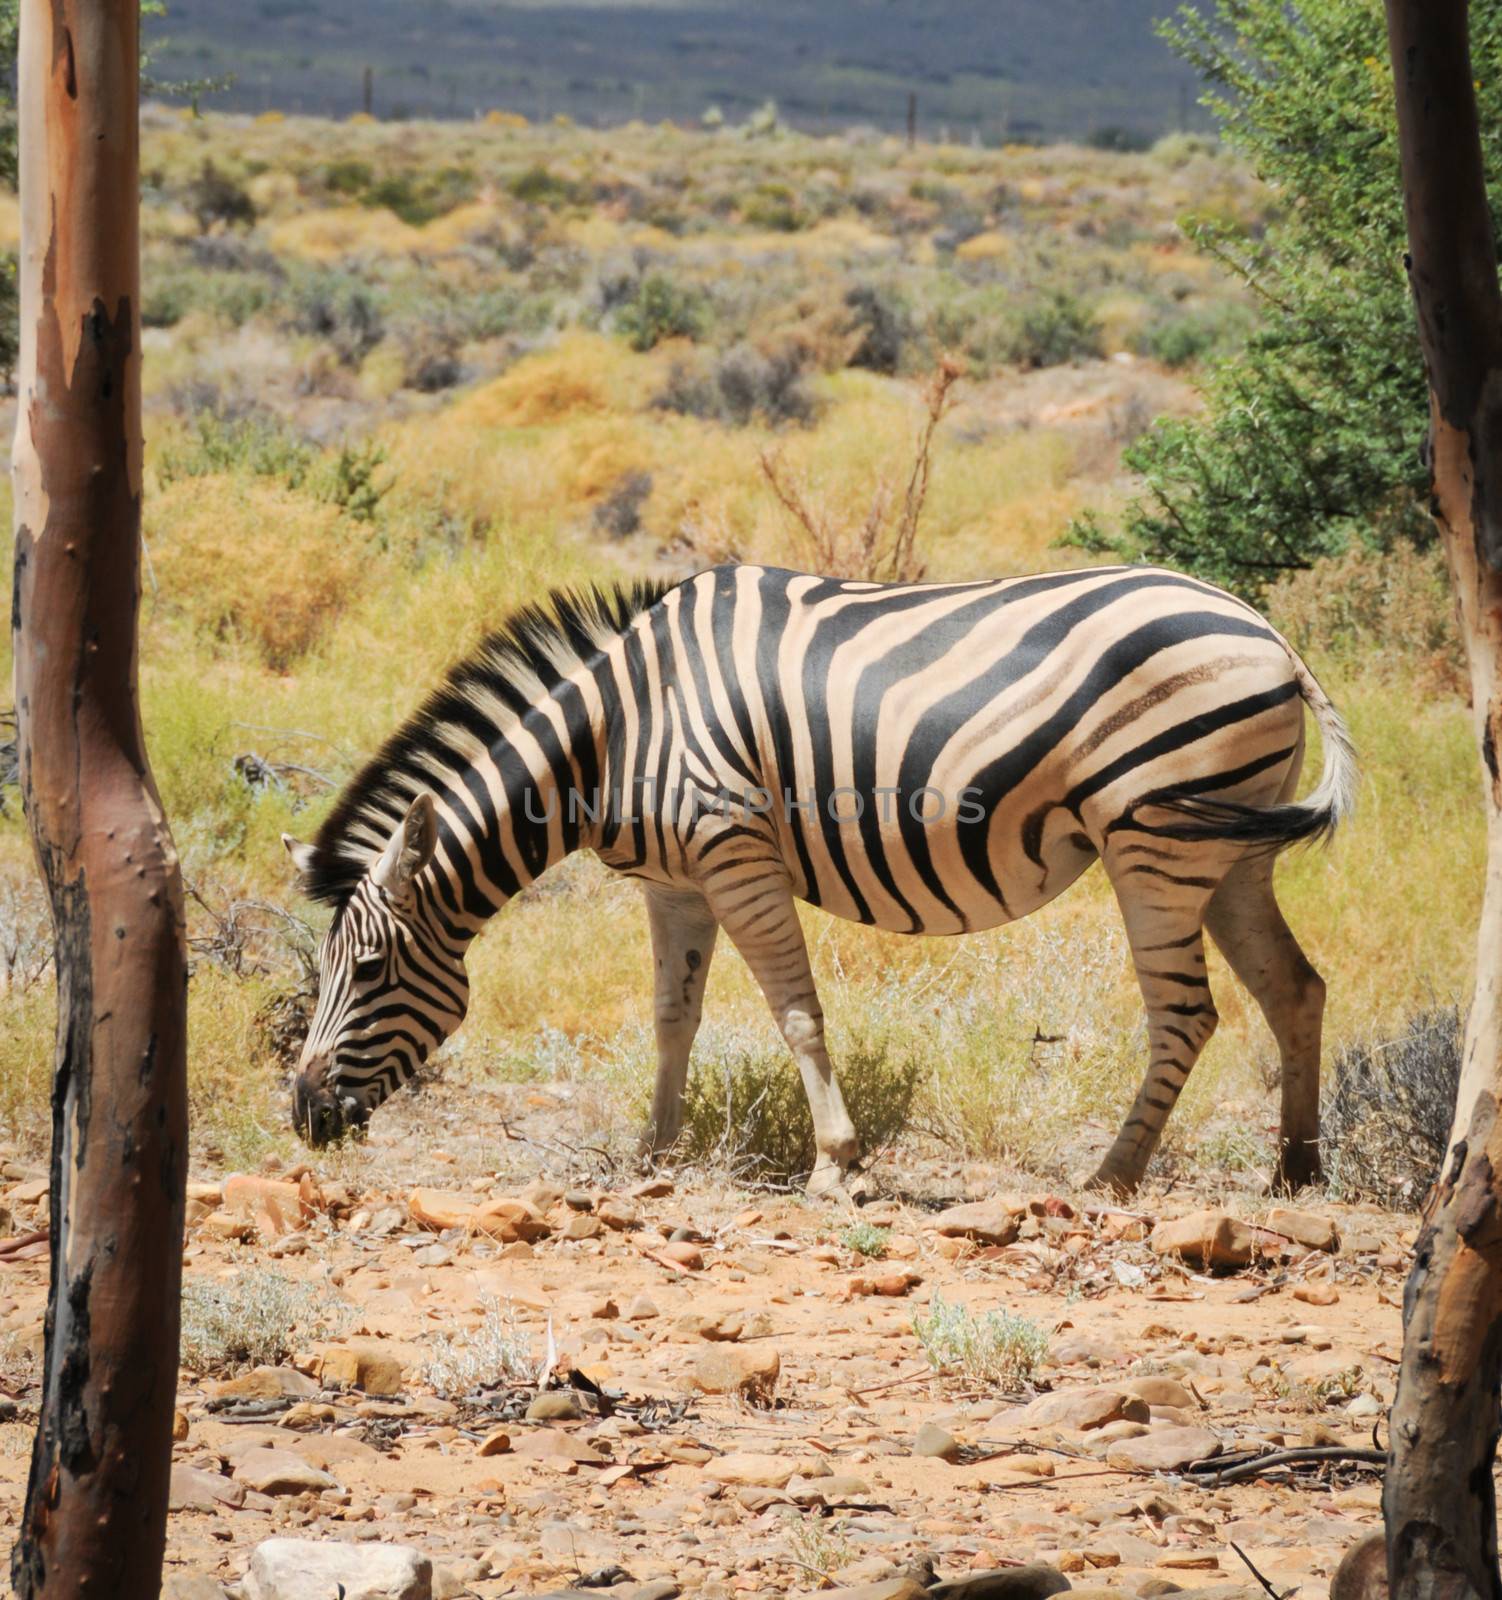 Striped zebra between two trees in the wild savanna, Africa